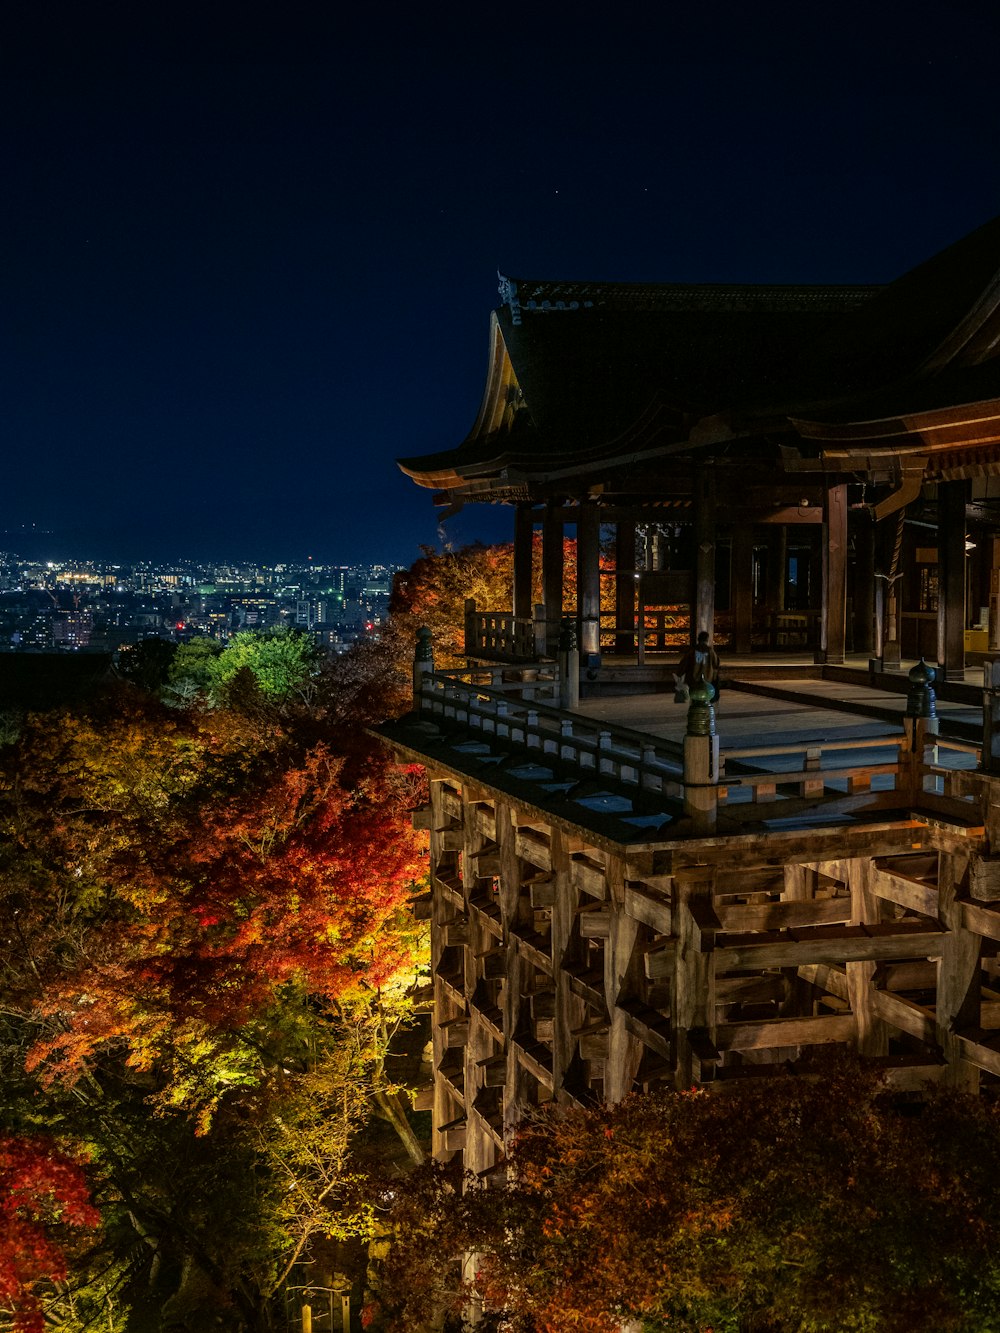 Kiyomizu-dera with a large deck and a city in the background